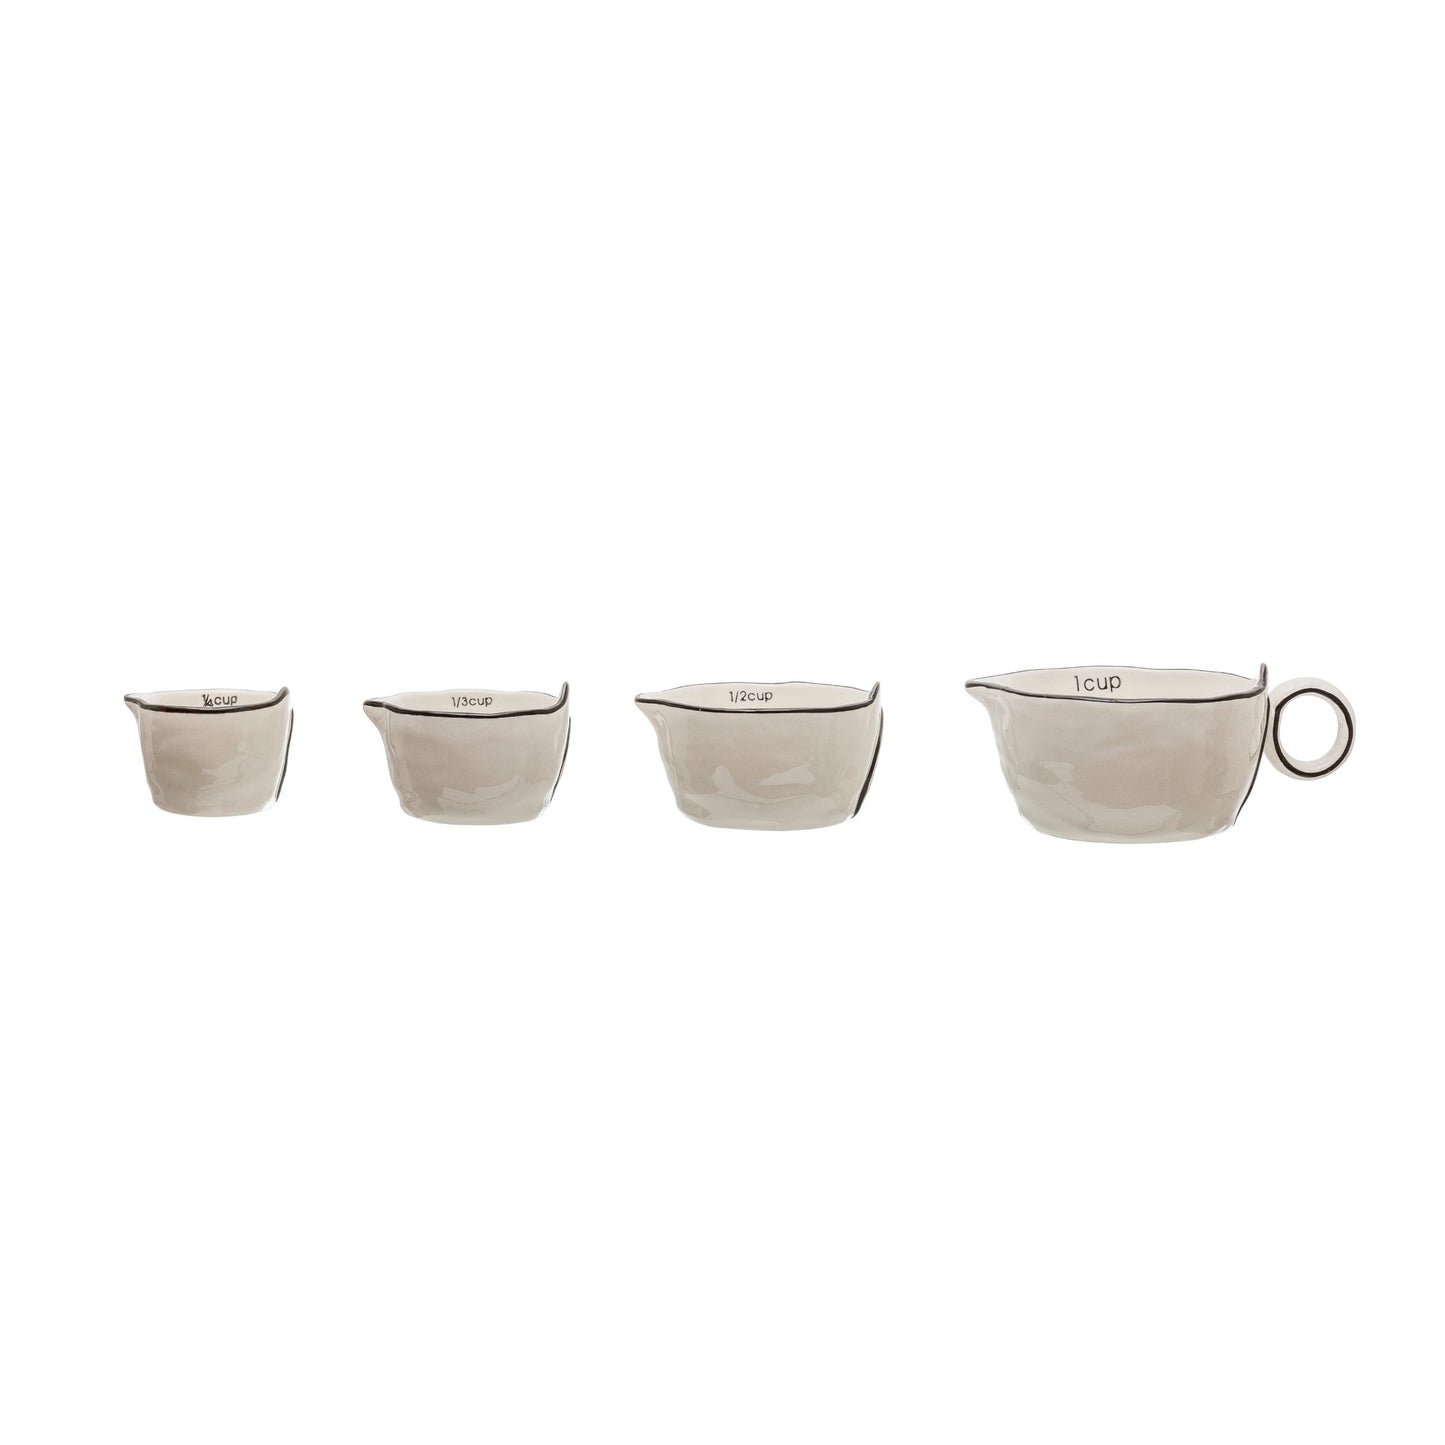 BLACK AND WHITE MEASURING CUPS